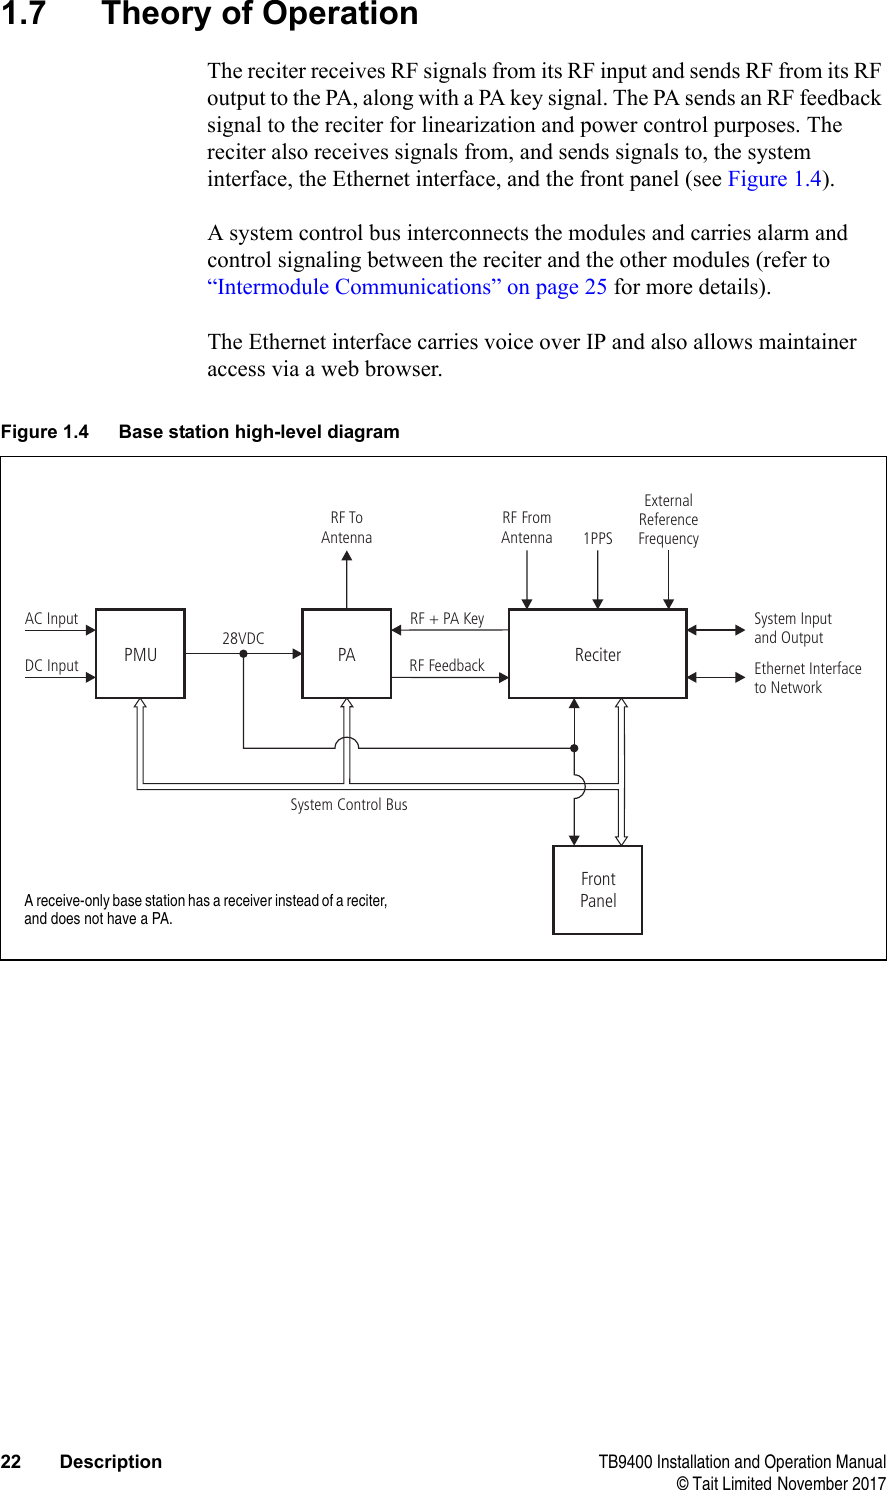  22 Description TB9400 Installation and Operation Manual© Tait Limited November 20171.7 Theory of OperationThe reciter receives RF signals from its RF input and sends RF from its RF output to the PA, along with a PA key signal. The PA sends an RF feedback signal to the reciter for linearization and power control purposes. The reciter also receives signals from, and sends signals to, the system interface, the Ethernet interface, and the front panel (see Figure 1.4).A system control bus interconnects the modules and carries alarm and control signaling between the reciter and the other modules (refer to “Intermodule Communications” on page 25 for more details). The Ethernet interface carries voice over IP and also allows maintainer access via a web browser. Figure 1.4 Base station high-level diagramReciterPMU PARF ToAntennaRF FromAntenna 1PPSExternalReferenceFrequencyAC InputDC Input28VDCSystem Control BusRF+PAKeyRF FeedbackSystem Inputand OutputEthernet Interfaceto NetworkFrontPanelA receive-only base station has a receiver instead of a reciter, and does not have a PA.